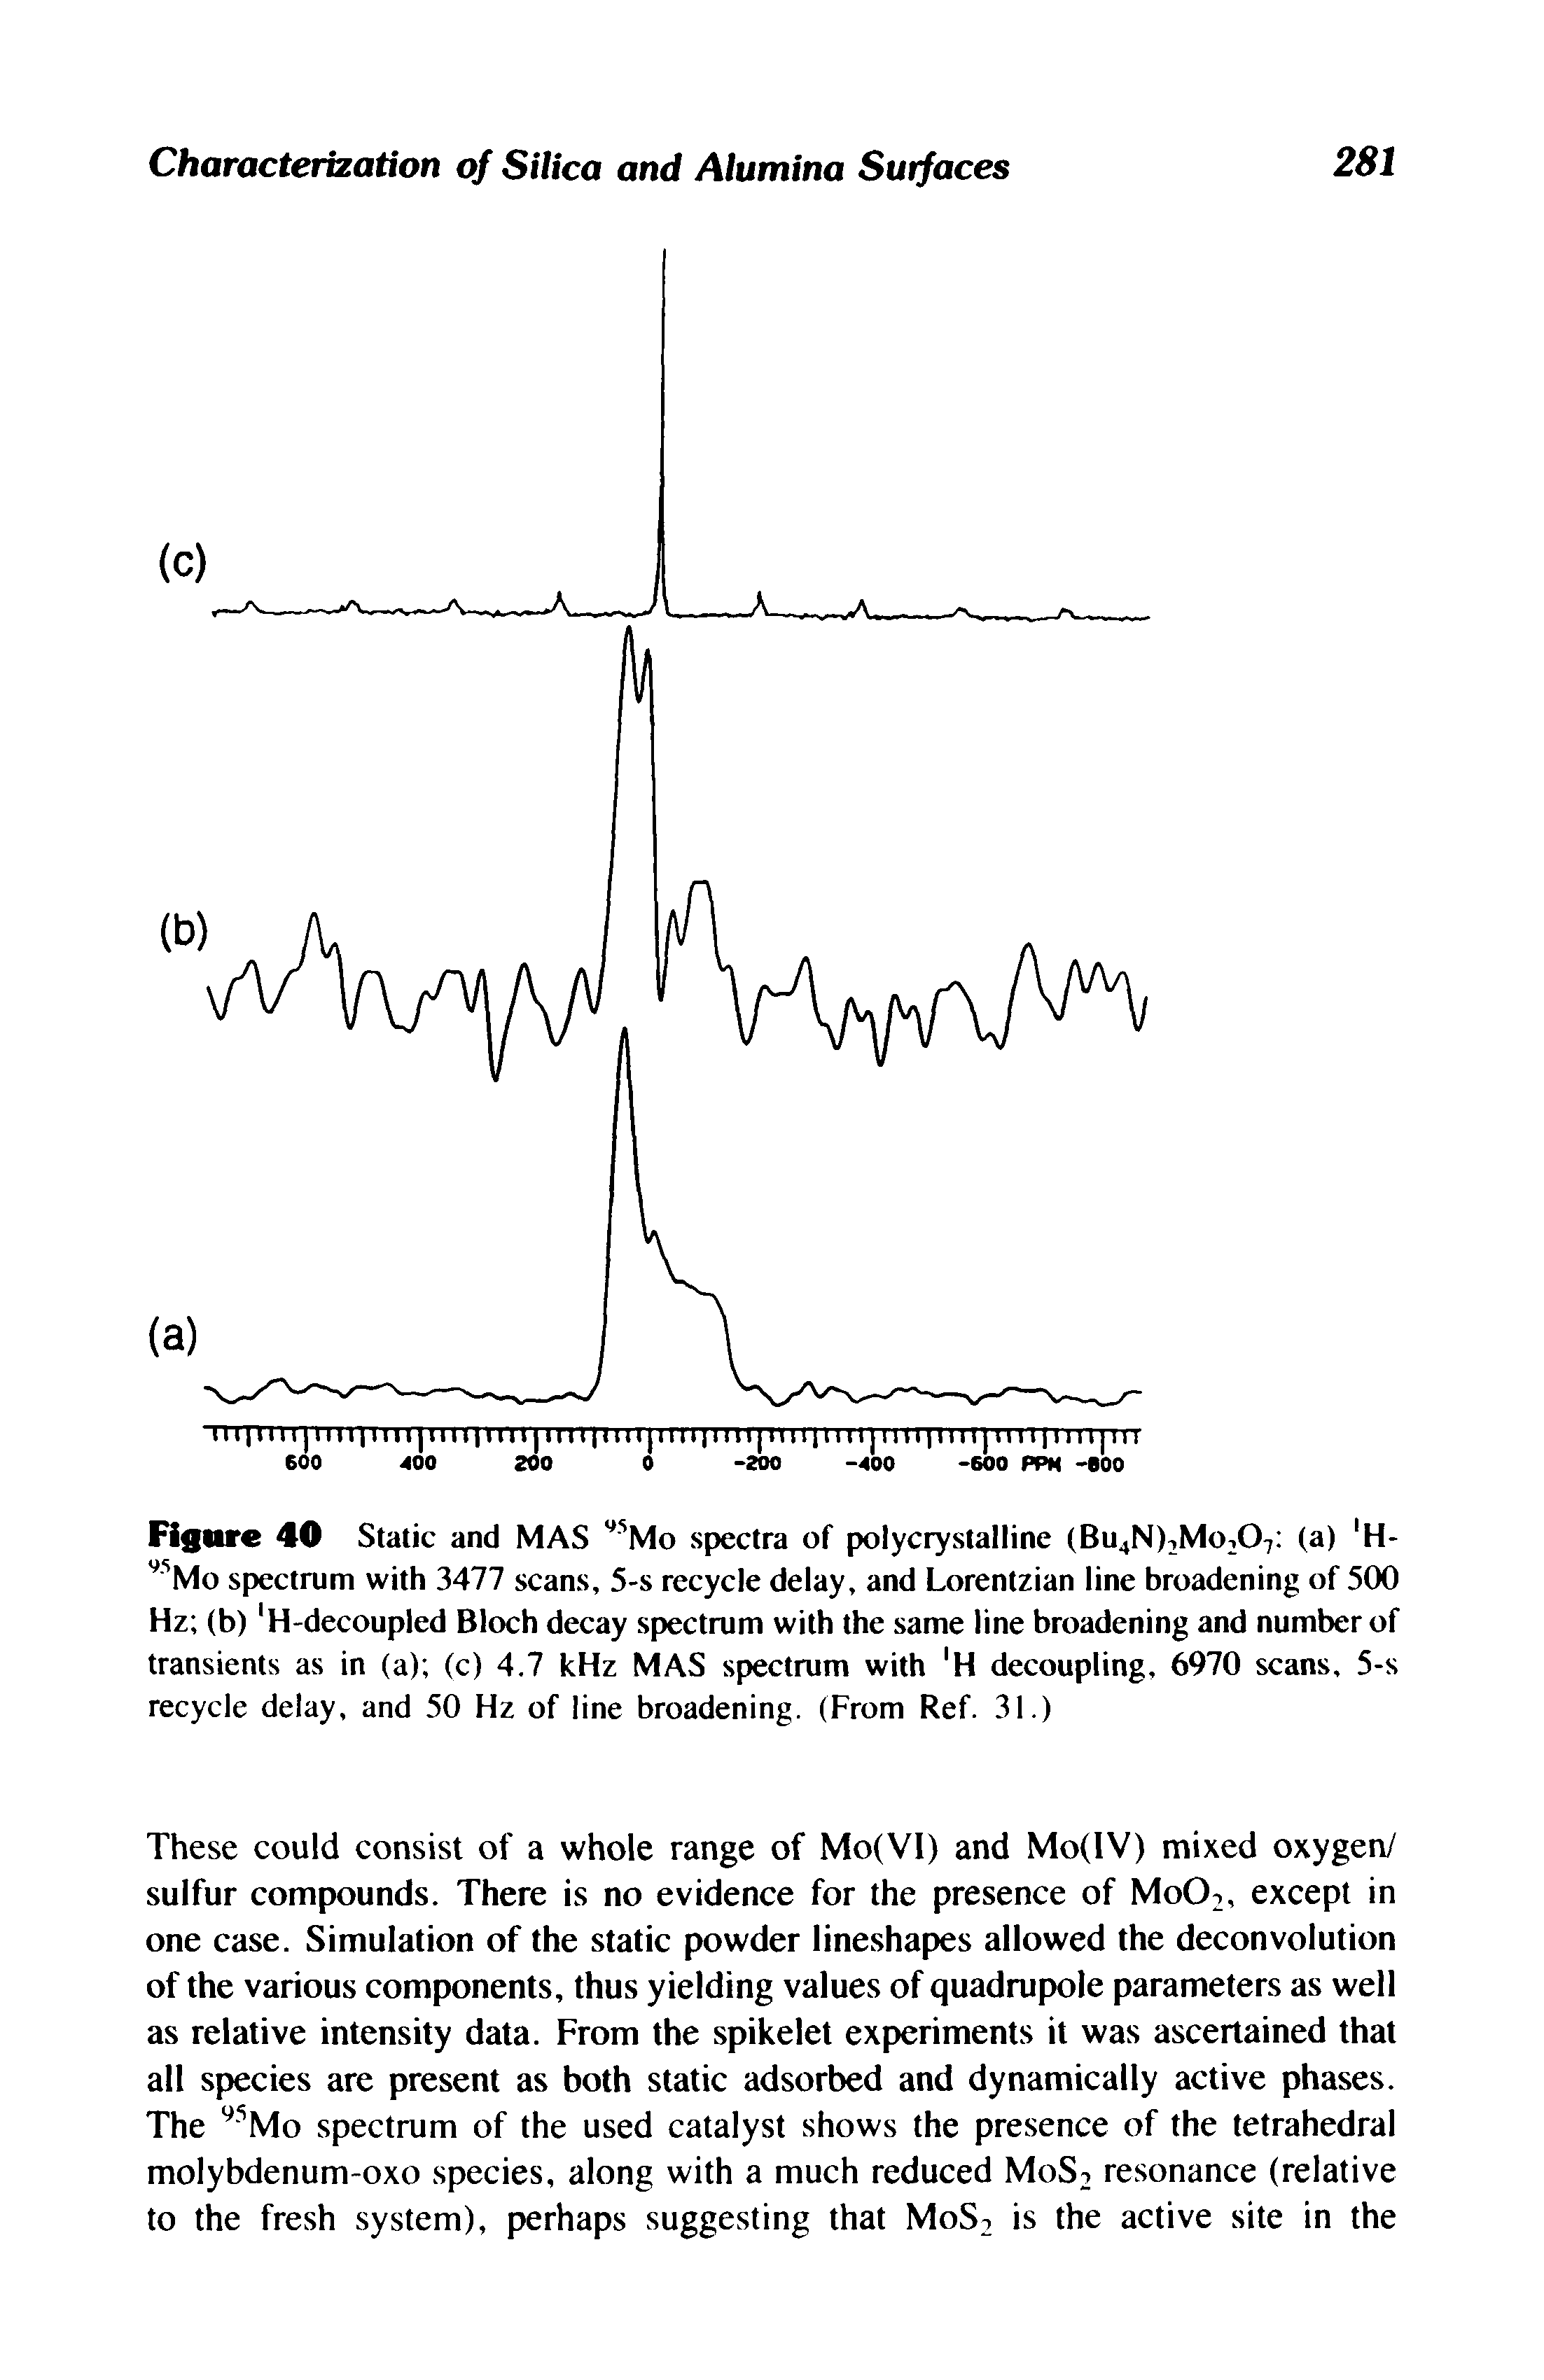 Figure 40 Static and MAS spectra of polycrystalline (Bu4N)iMo207 (a) H- Mo spectrum with 3477 scans, 5-s recycle delay, and Lorentzian line broadening of 500 Hz (b) H-decoupled Bloch decay spectrum with the same line broadening and number of transients as in (a) (c) 4.7 kHz MAS spectrum with H decoupling, 6970 scans, 5-s recycle delay, and 50 Hz of line broadening. (From Ref. 31.)...